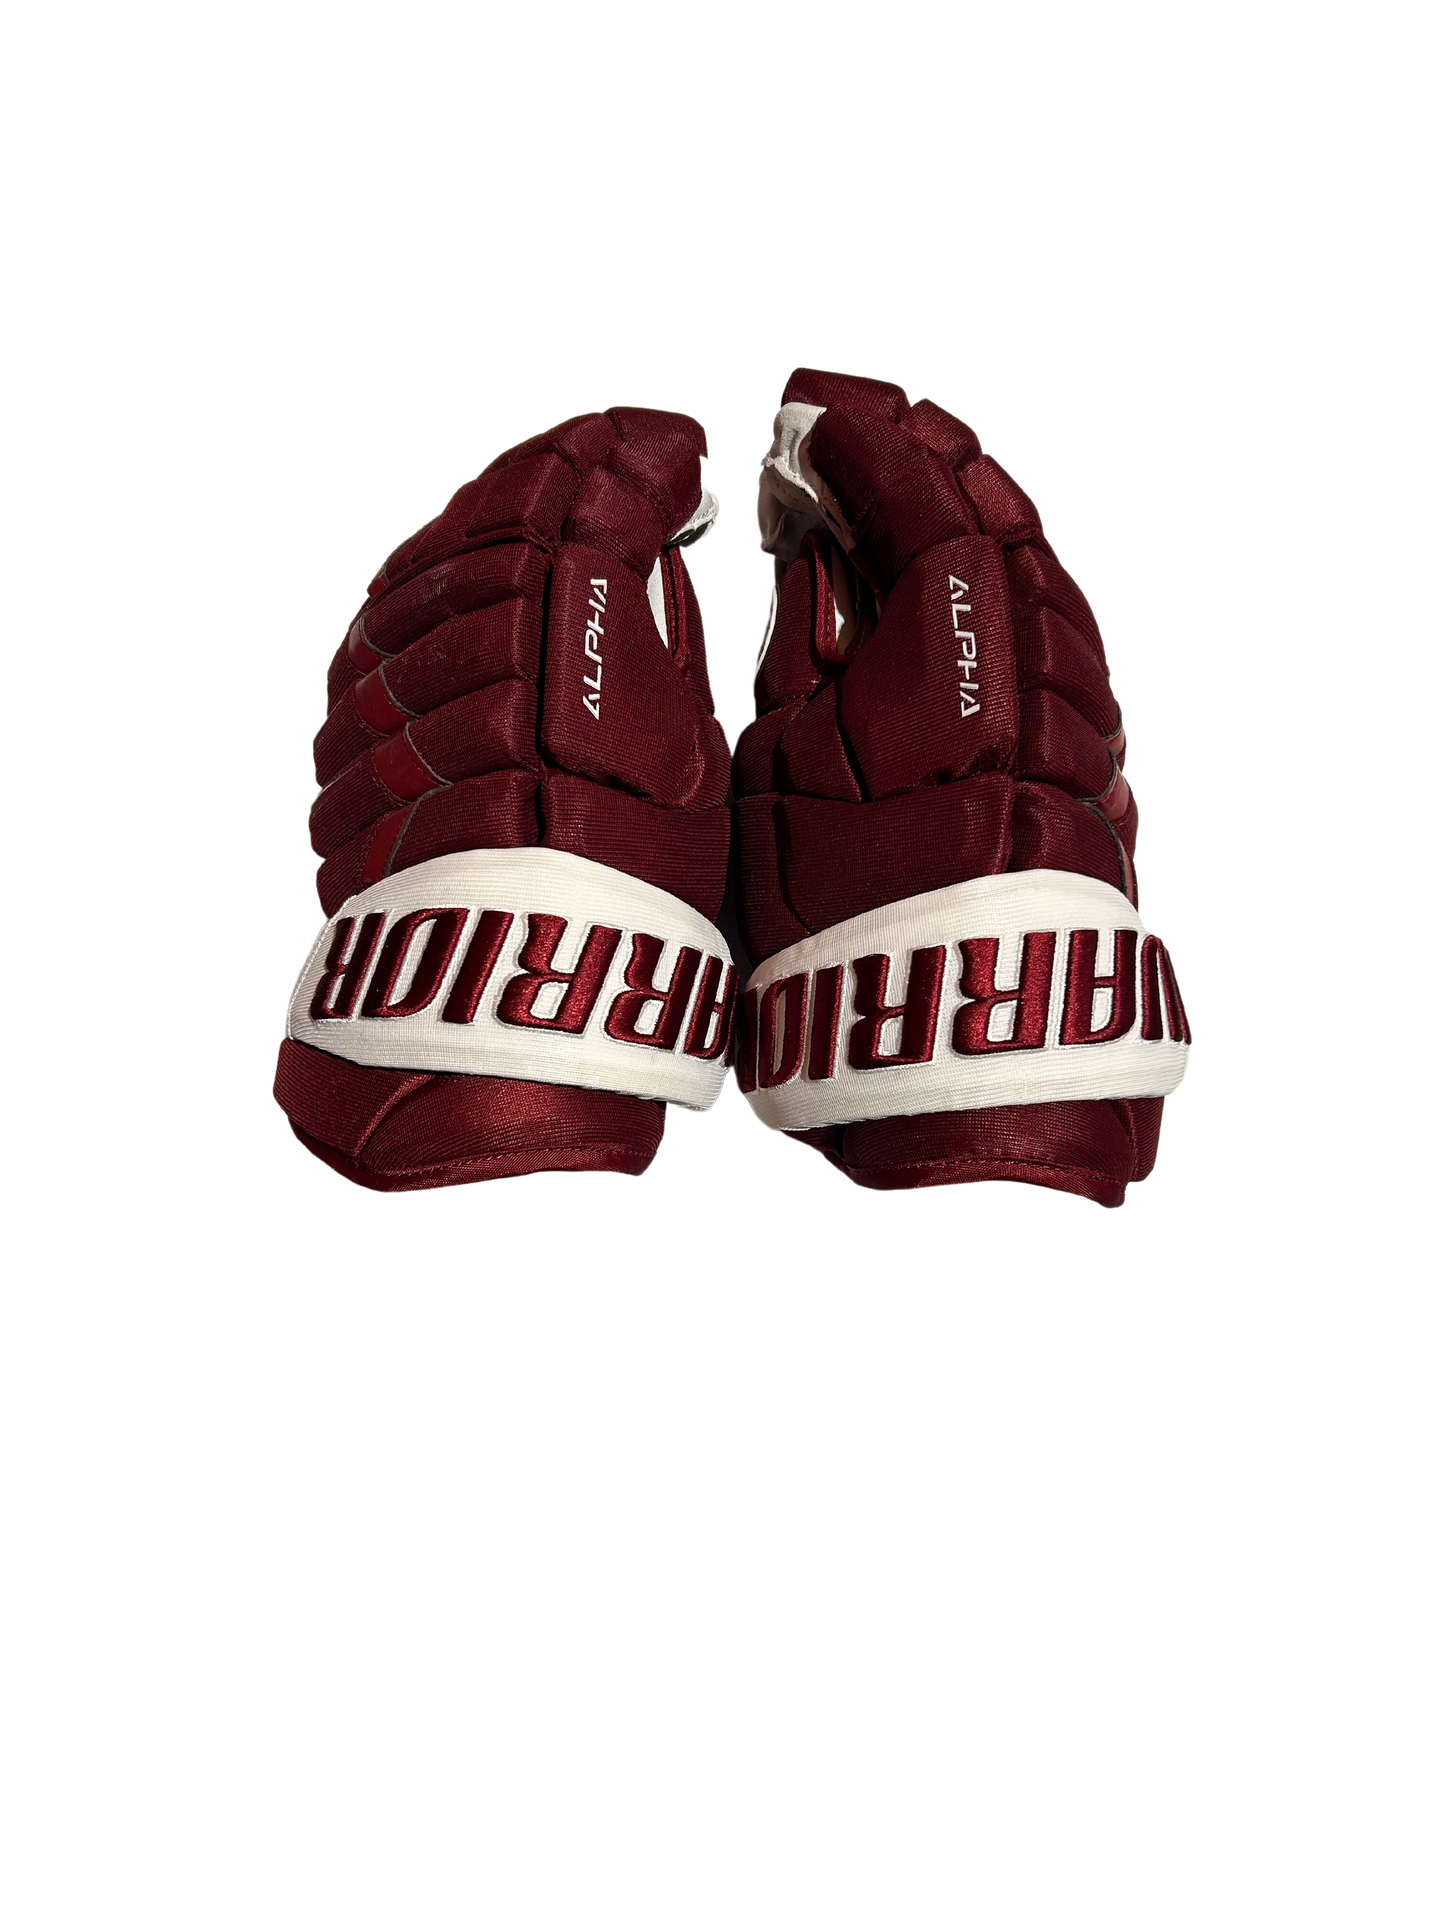 New Team Issued Reverse Retro Colorado Avalanche Warrior Alpha Gloves (Multiple Sizes)